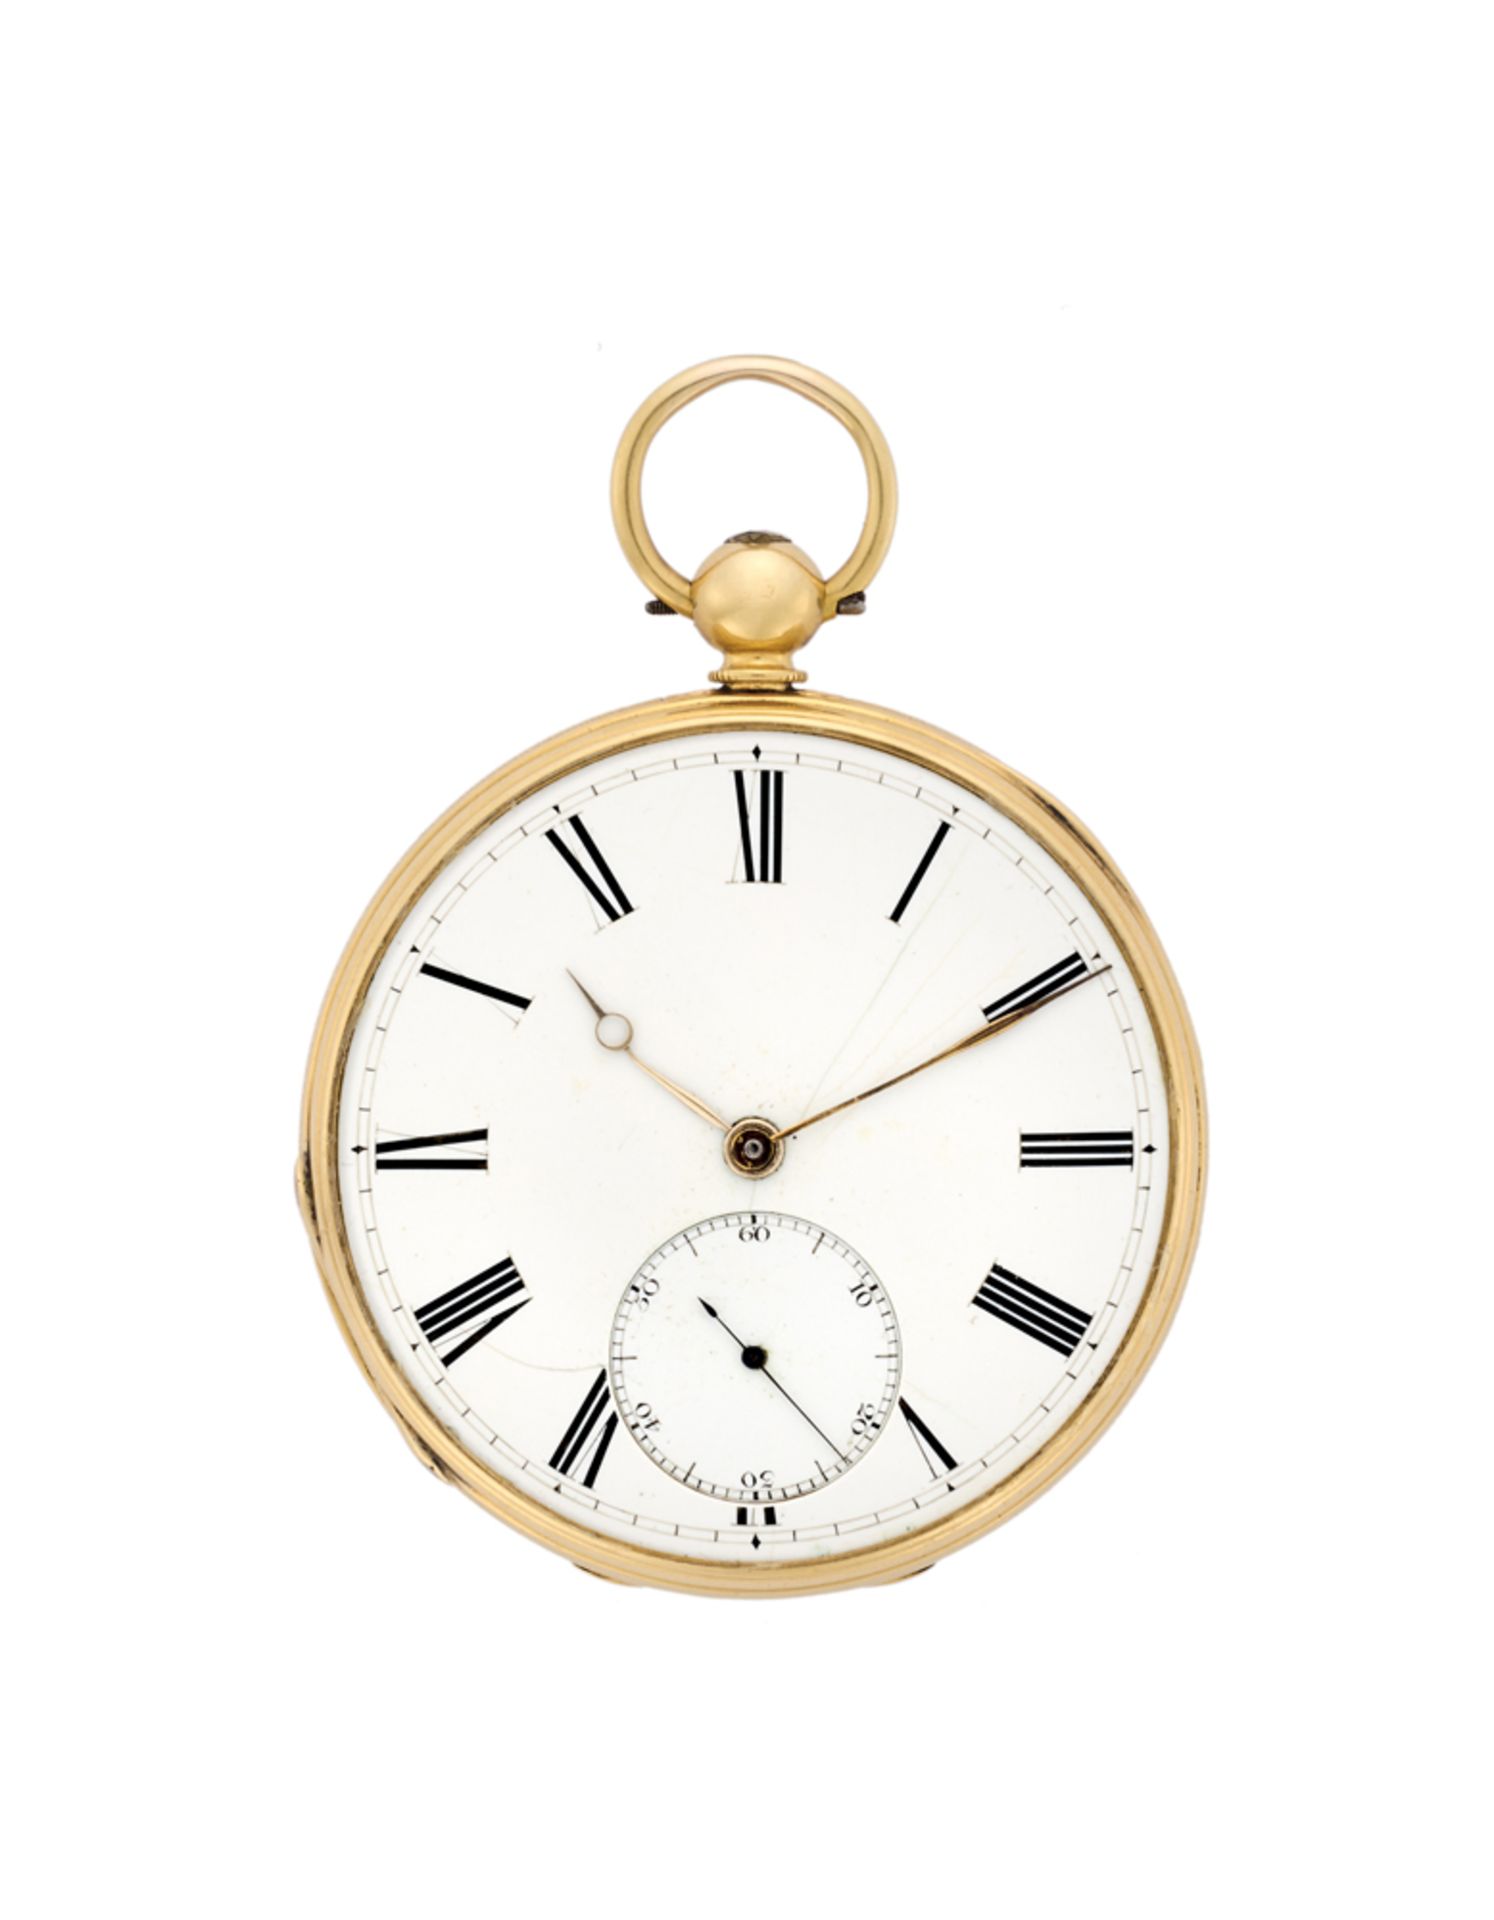 ANONYMOUSGent's 18K gold pocket watch19th centuryKey-wind movementWhite dial with Roman numerals,